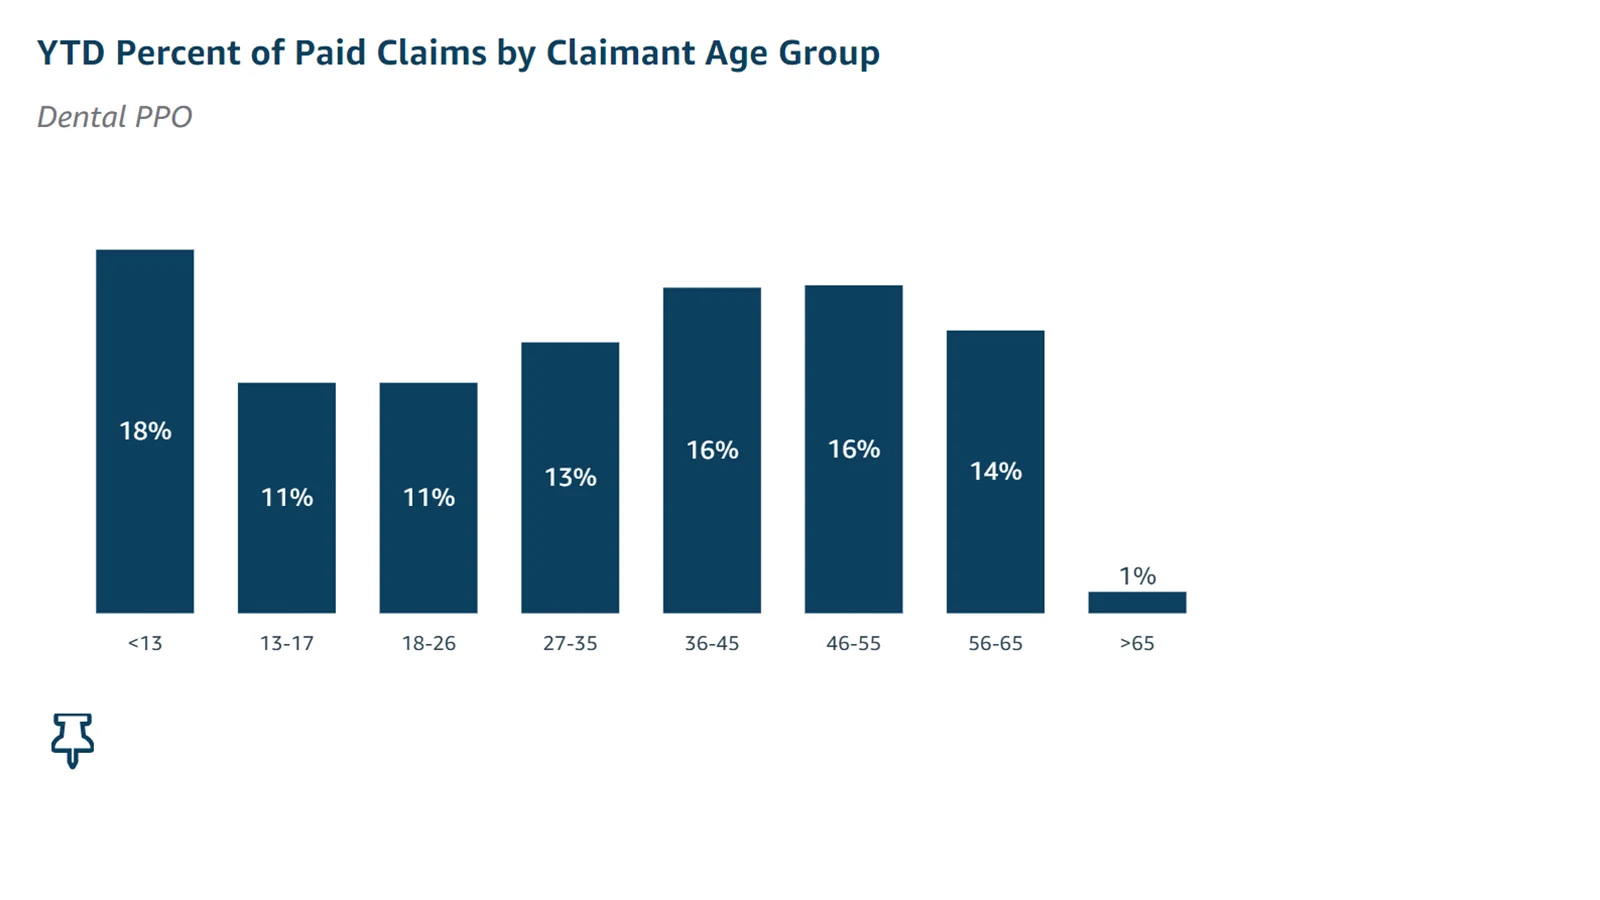 Percent of paid claims